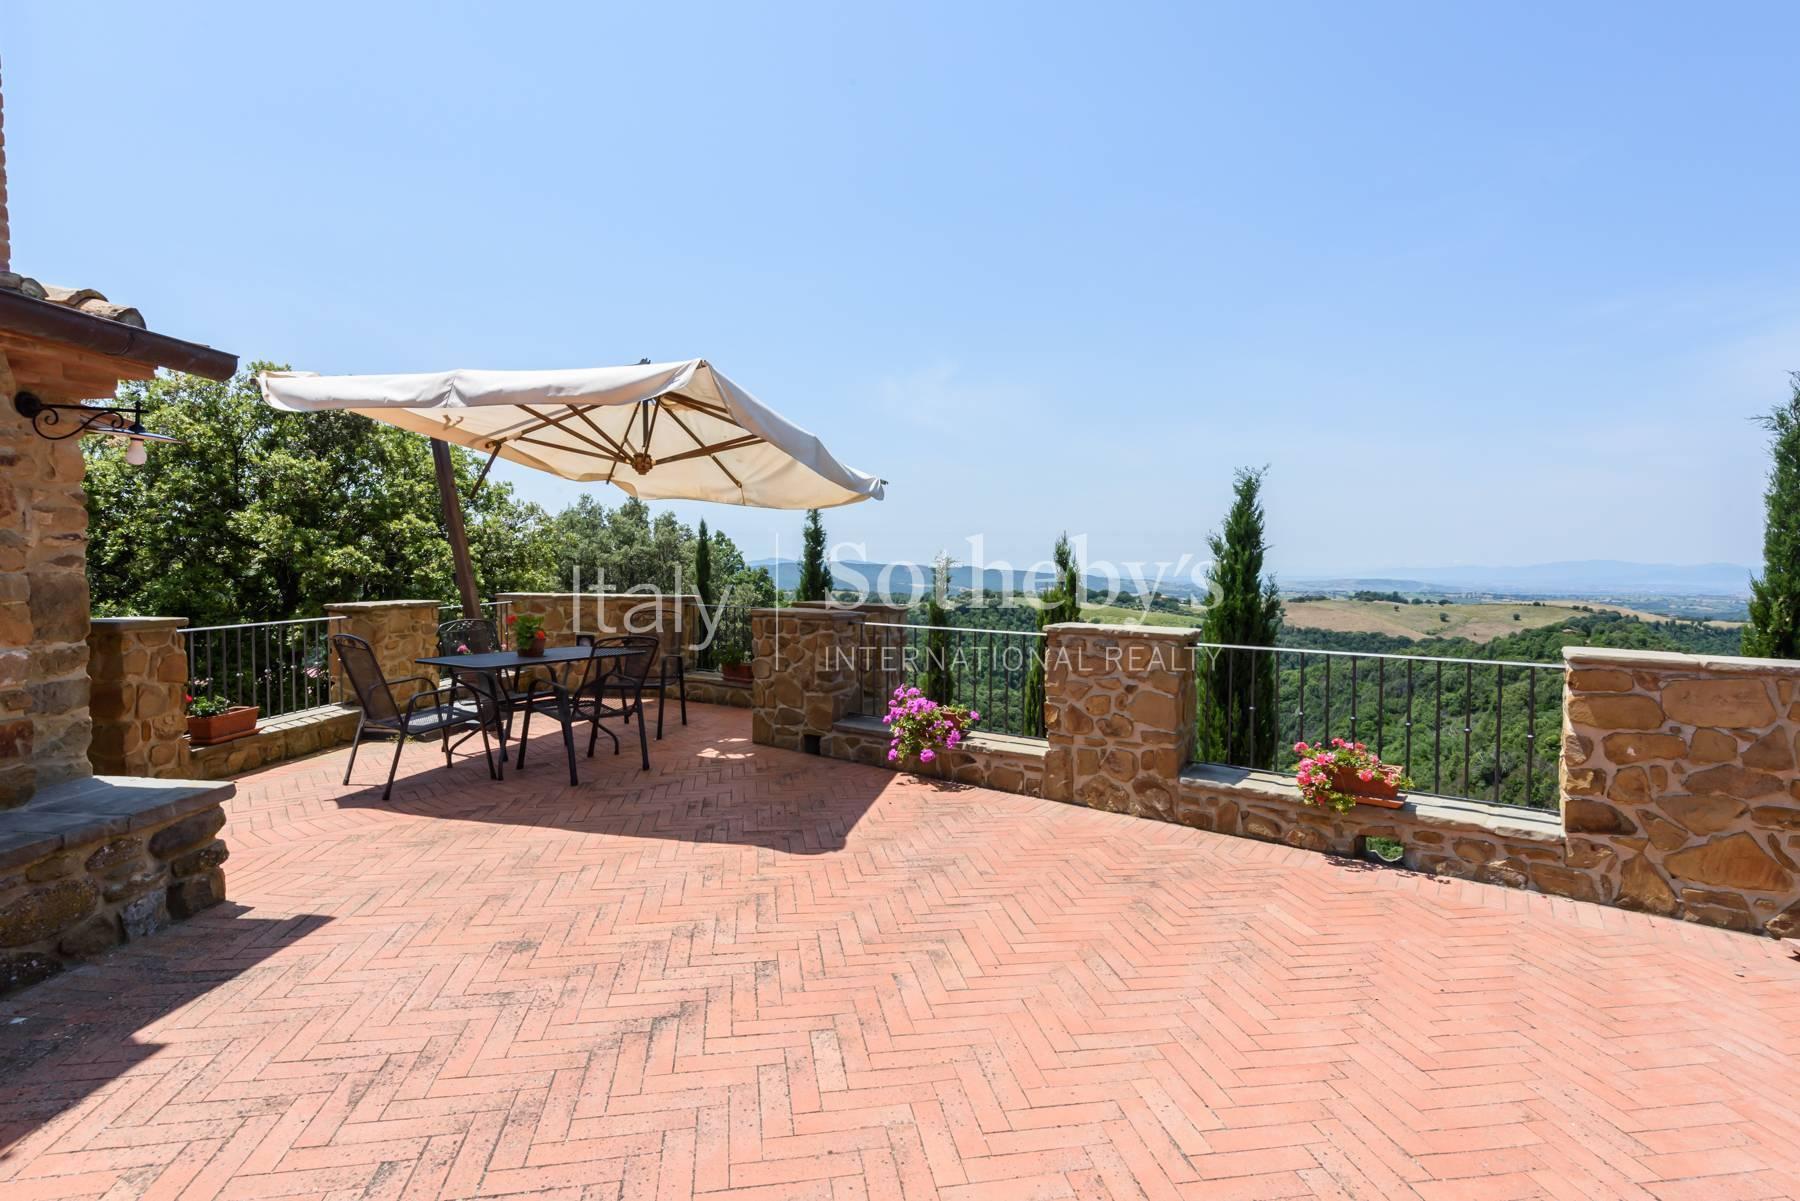 Enchanting property in maremma with vineyards and sea view - 6